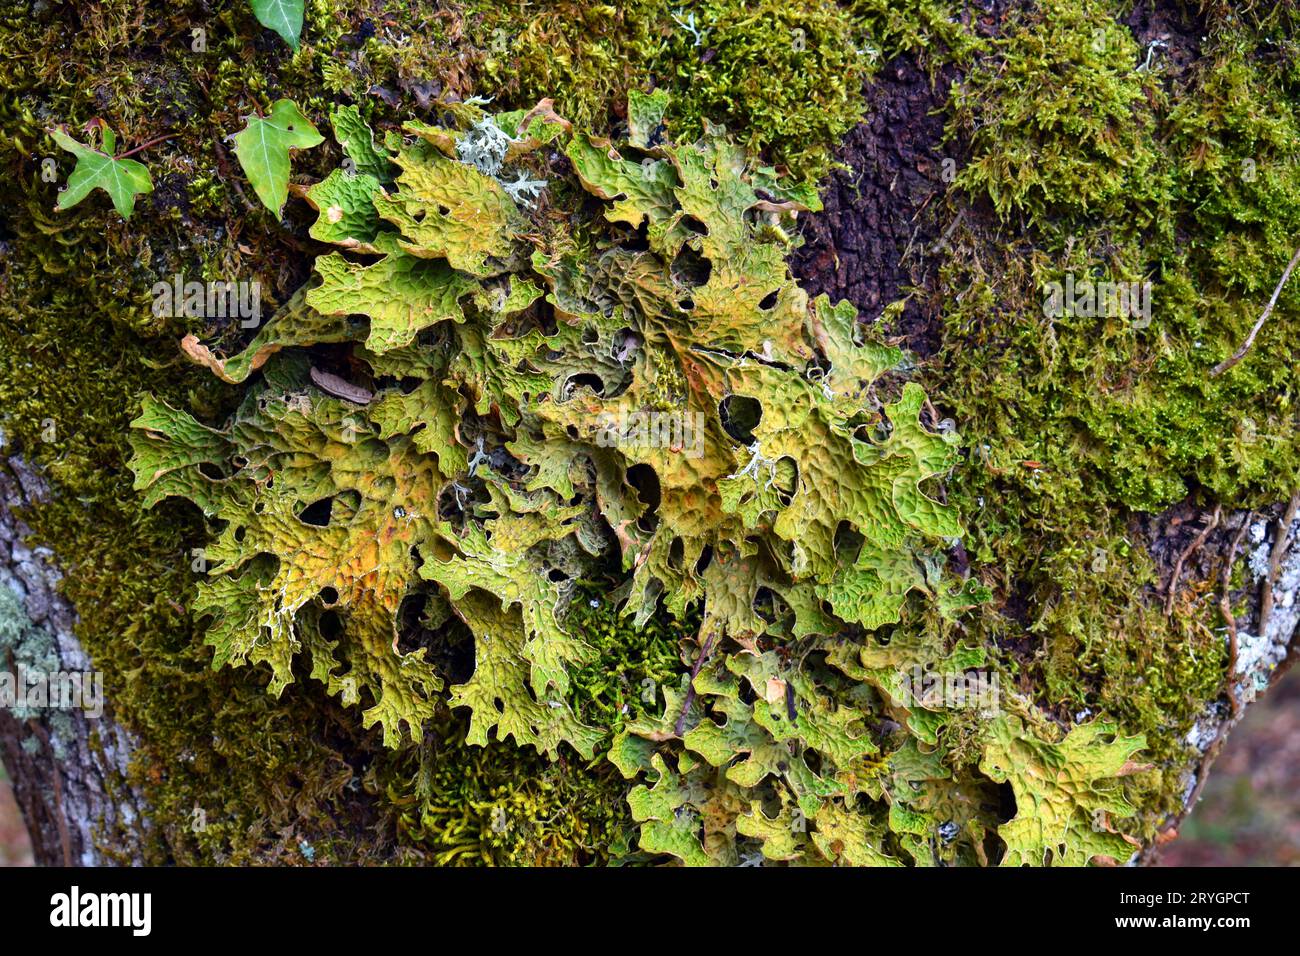 The medicinal lichen Lobaria pulmonaria on the trunk of an tree. Stock Photo